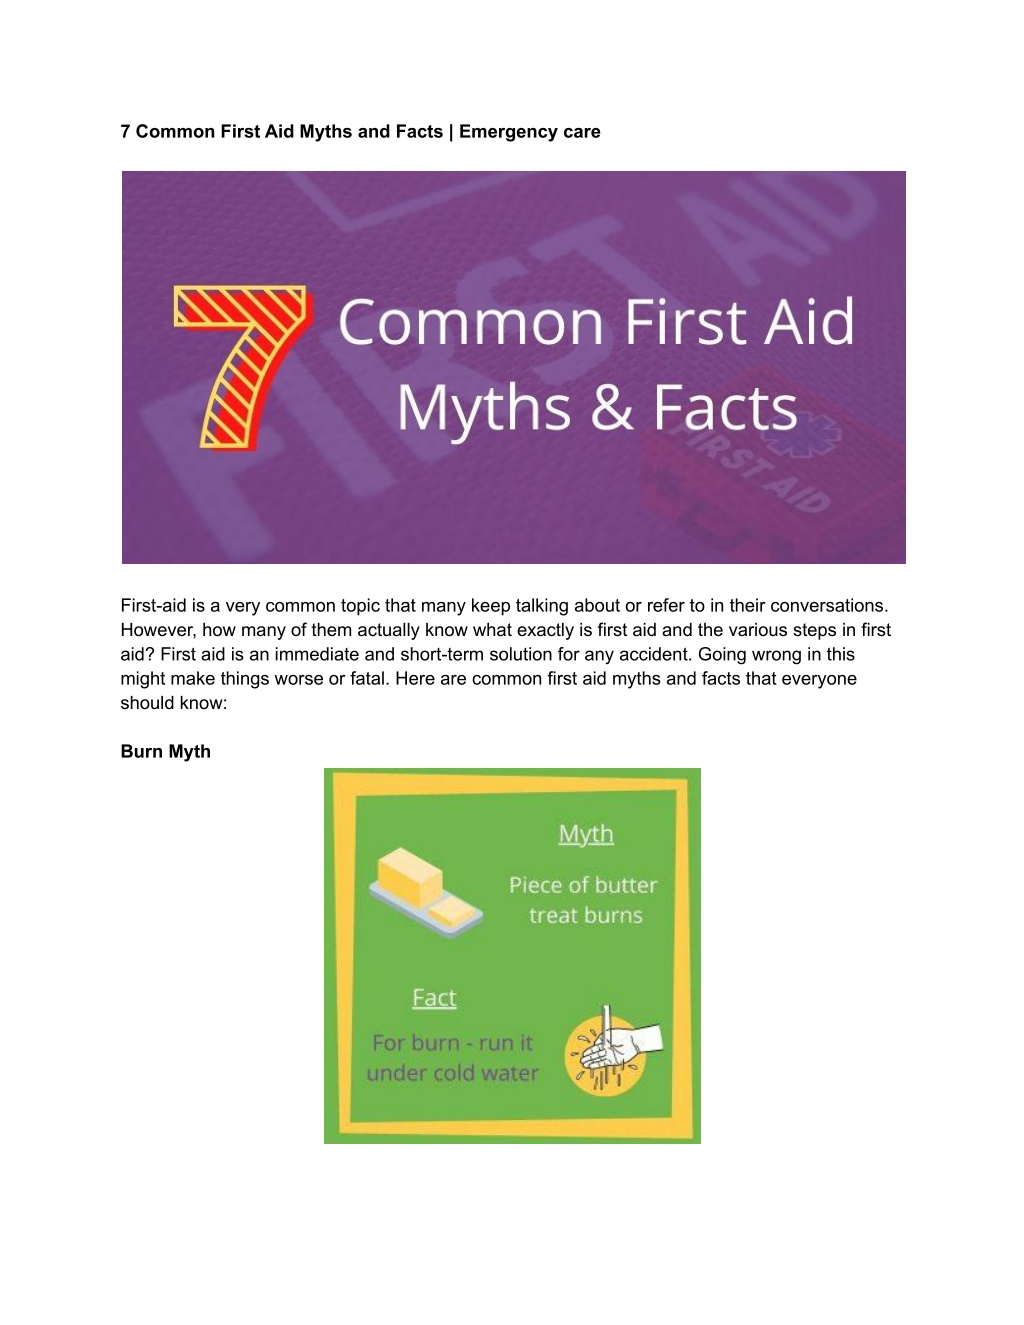 Ppt 7 Common First Aid Myths And Facts Emergency Care Powerpoint Presentation Id11070611 